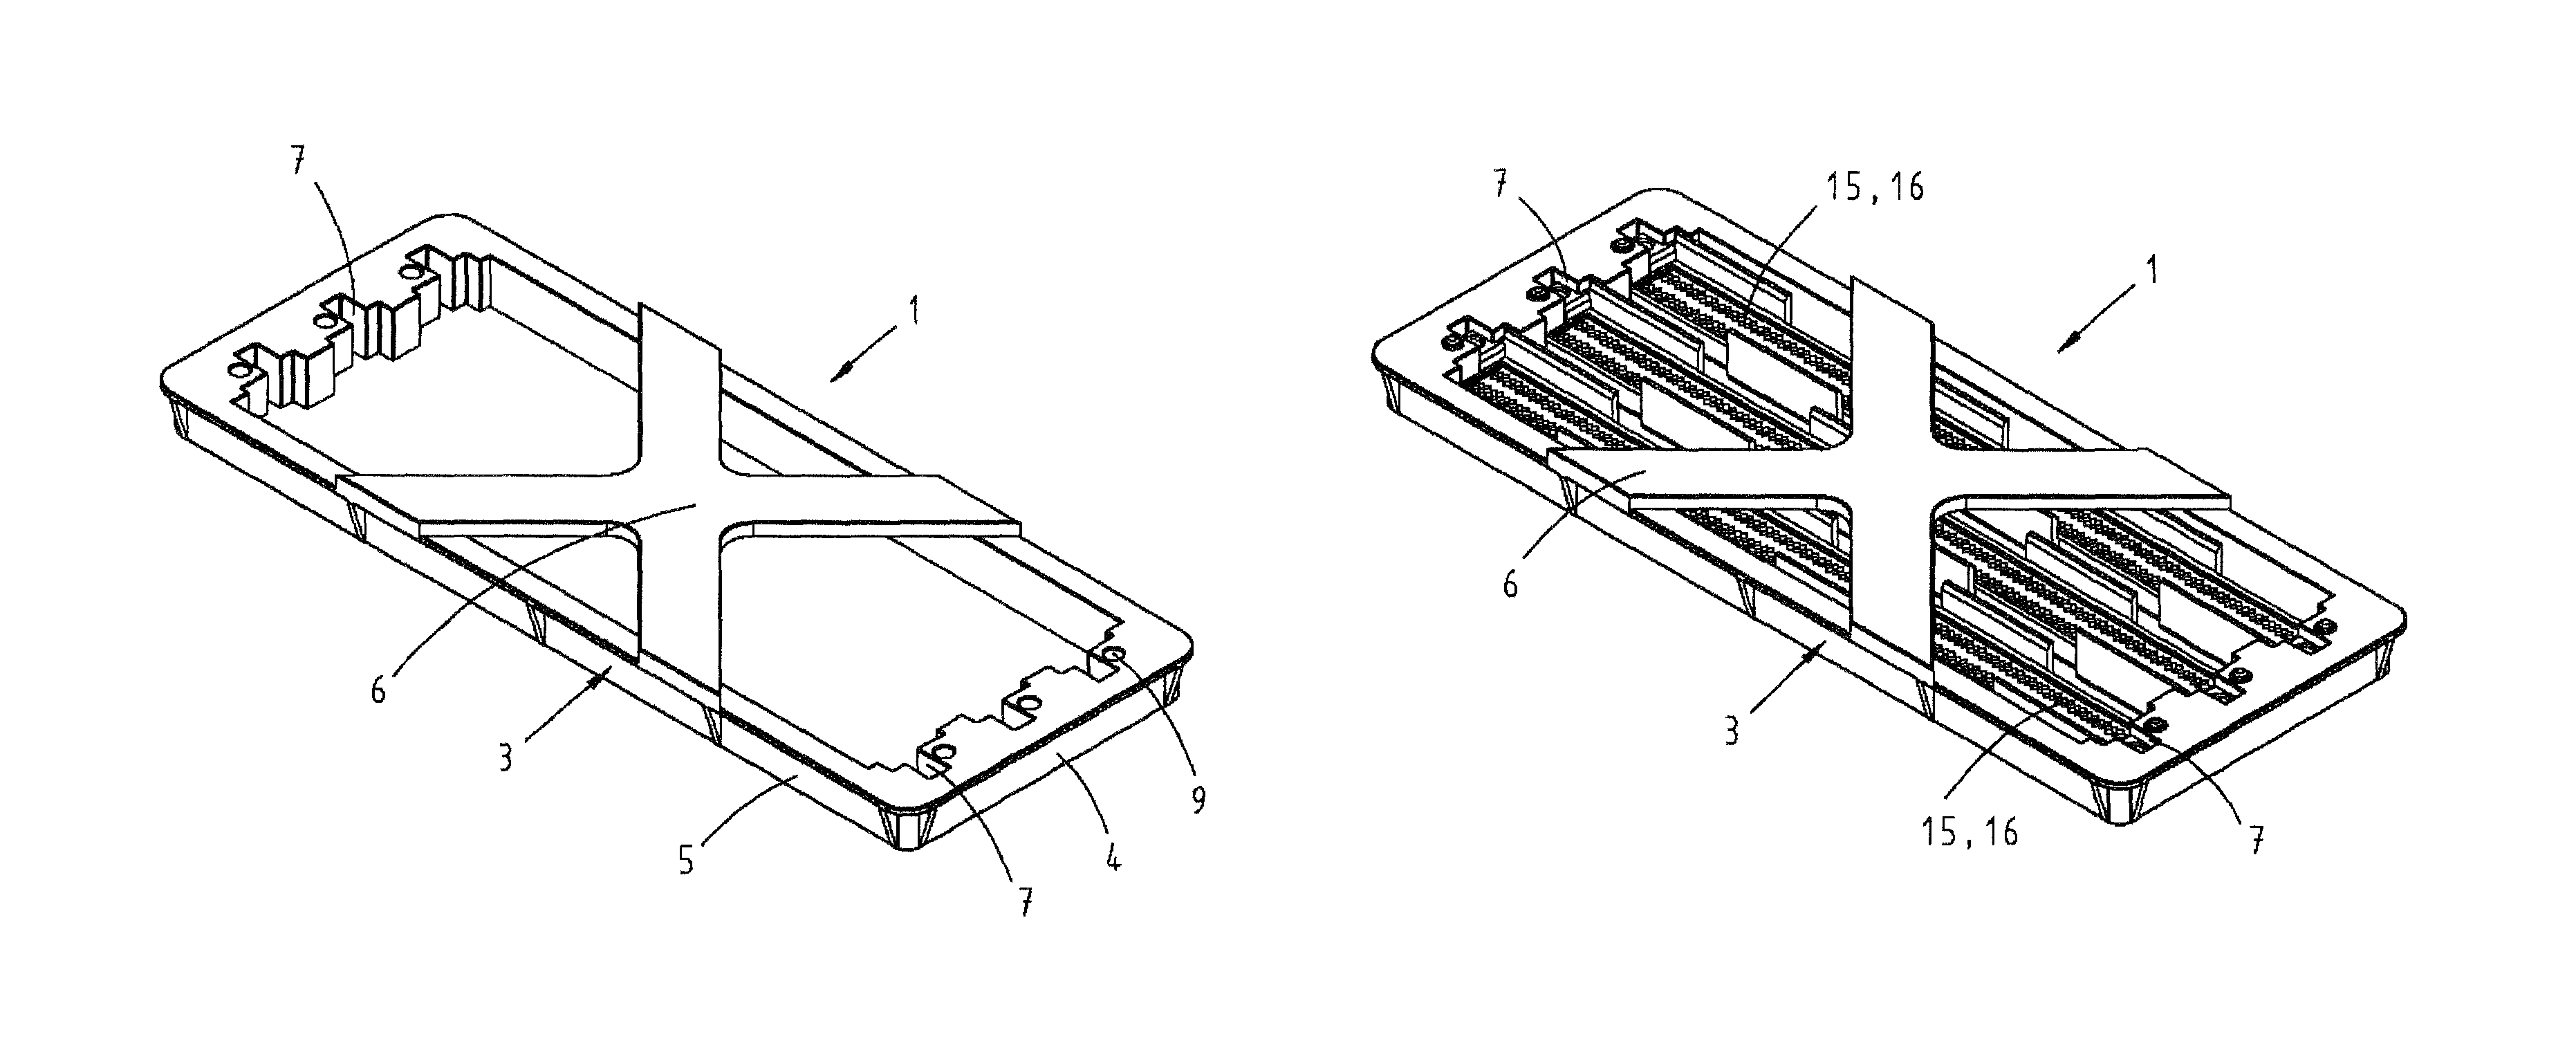 Assembly aid for printed board connectors